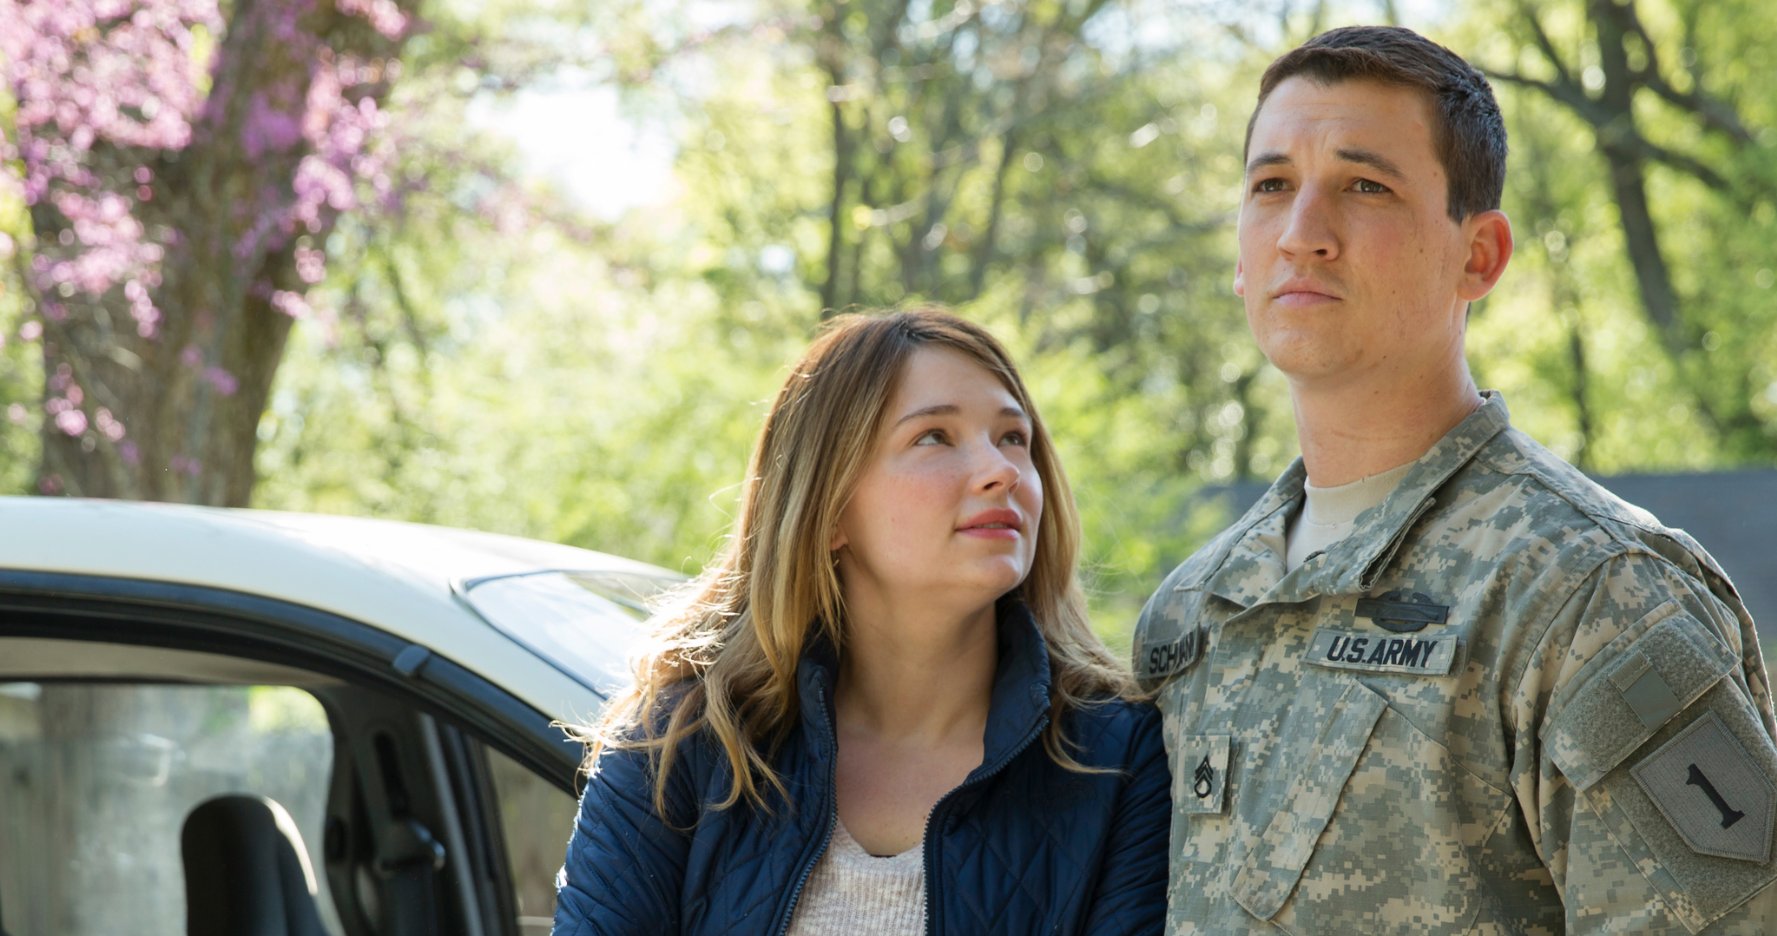 Film review for the new biography drama THANK YOU FOR YOUR SERVICE, opening in theatres October 27th, 2017. | Film review for the new biography drama THANK YOU FOR YOUR SERVICE, opening in theatres October 27th, 2017.